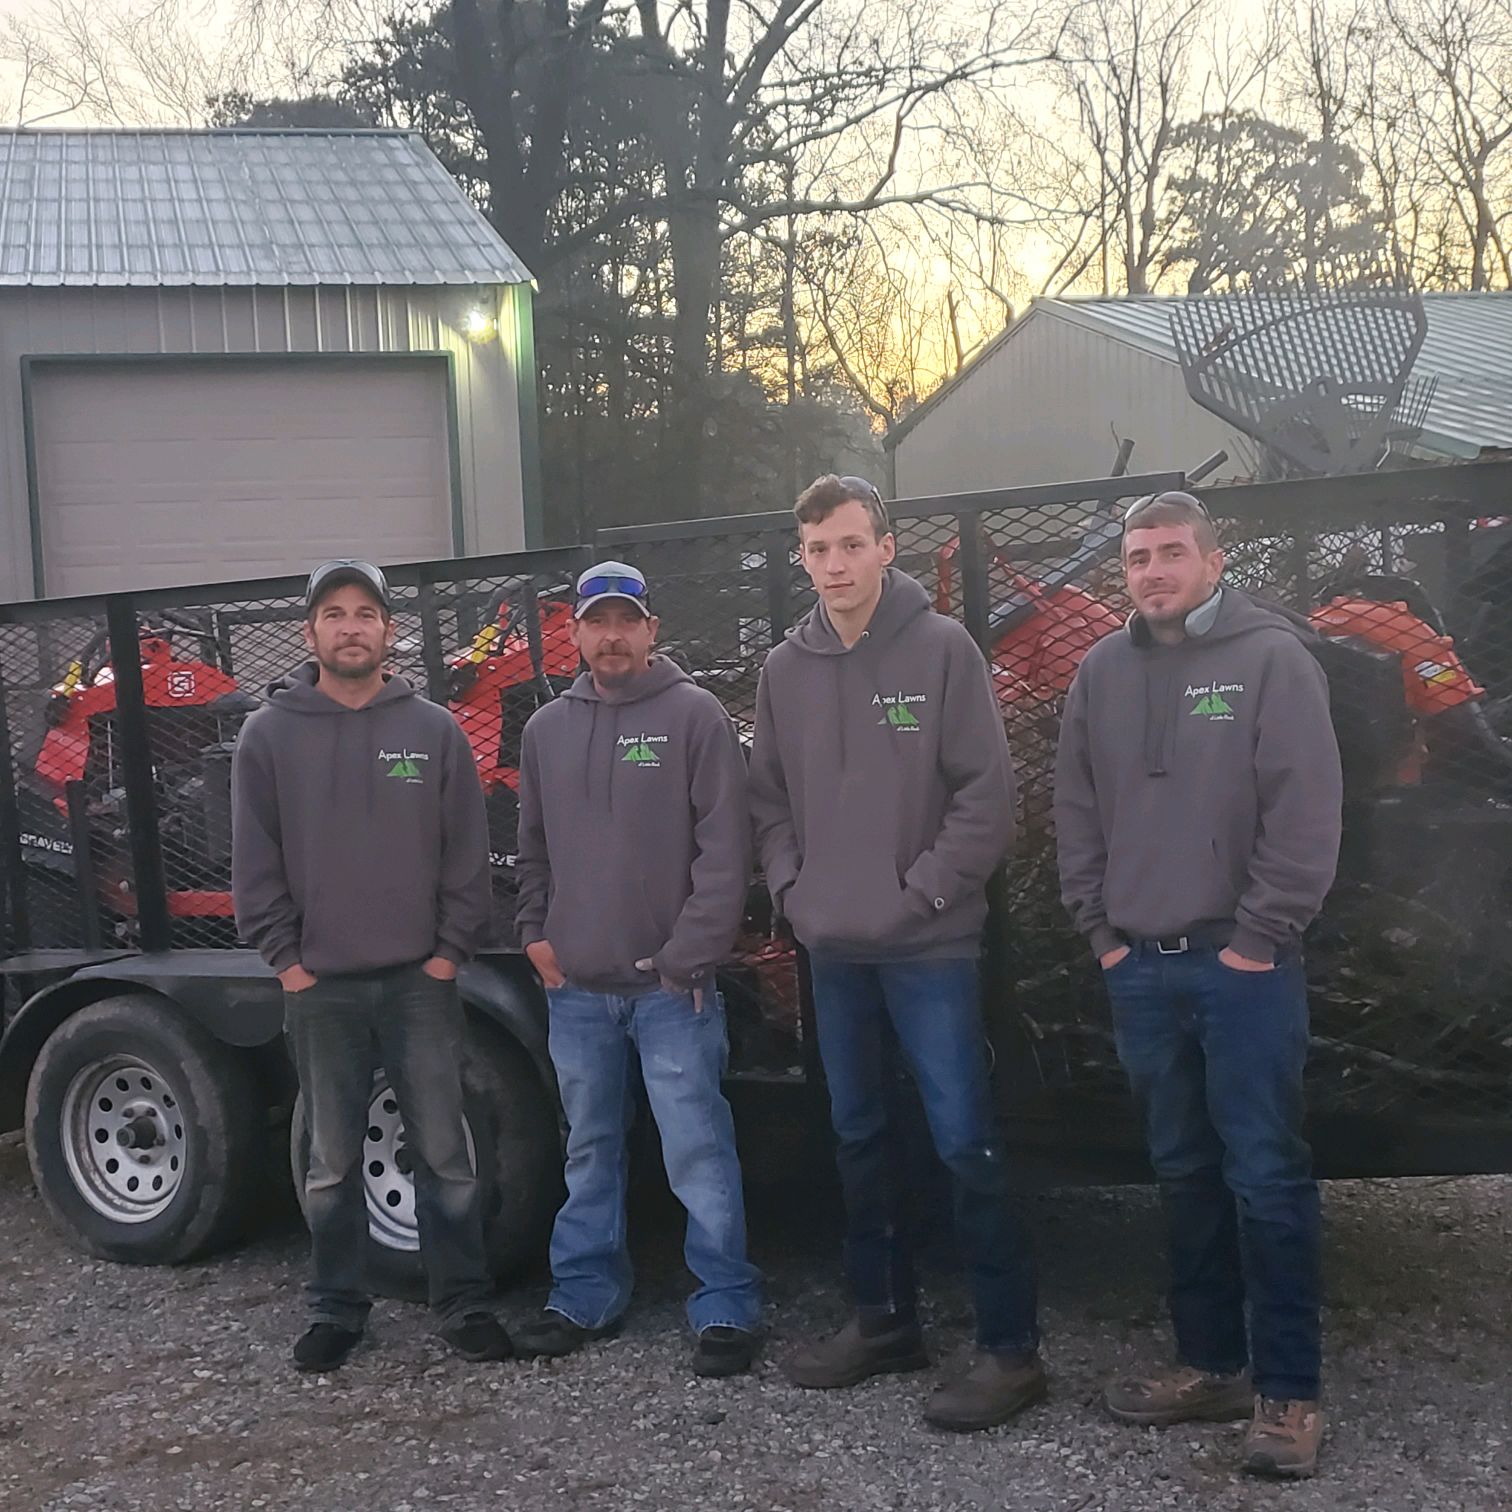 A team of professional lawn care technicians from Apex Lawns standing in front of a fully-equipped work trailer. The technicians are dressed in matching uniforms and are holding various tools and equipment, showcasing their readiness to tackle any lawn care task. The Apex Lawns logo is prominently displayed on the side of the trailer, highlighting the company's commitment to providing quality services